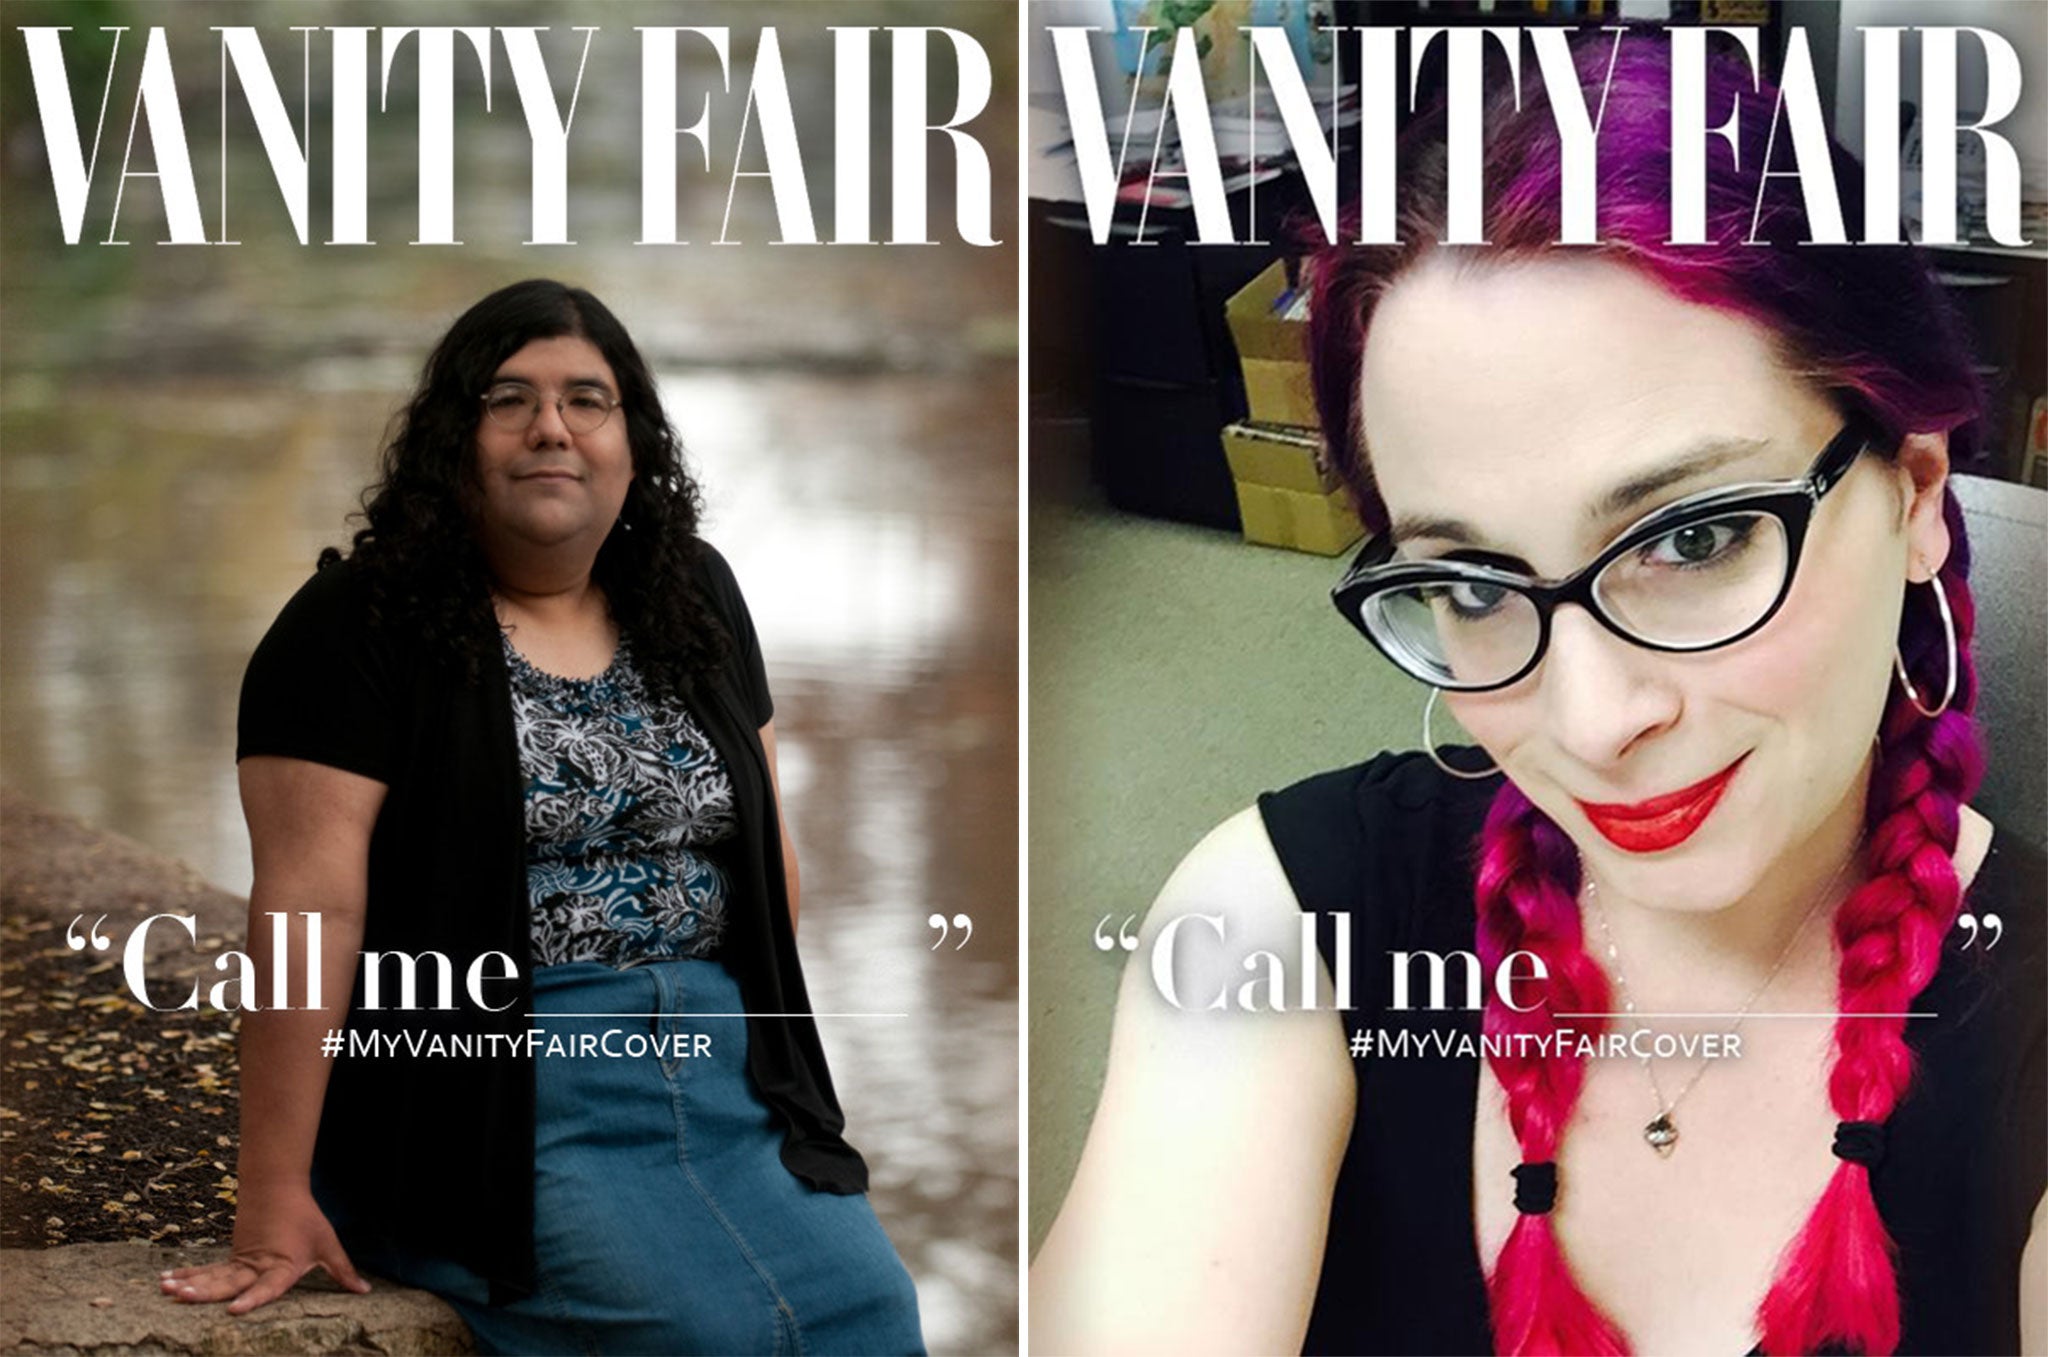 Jenn Dolari (l) and Crystal Frasier (r) kicked off the trend by creating a template of the Vanity Fair cover for trans people to upload images of themselves